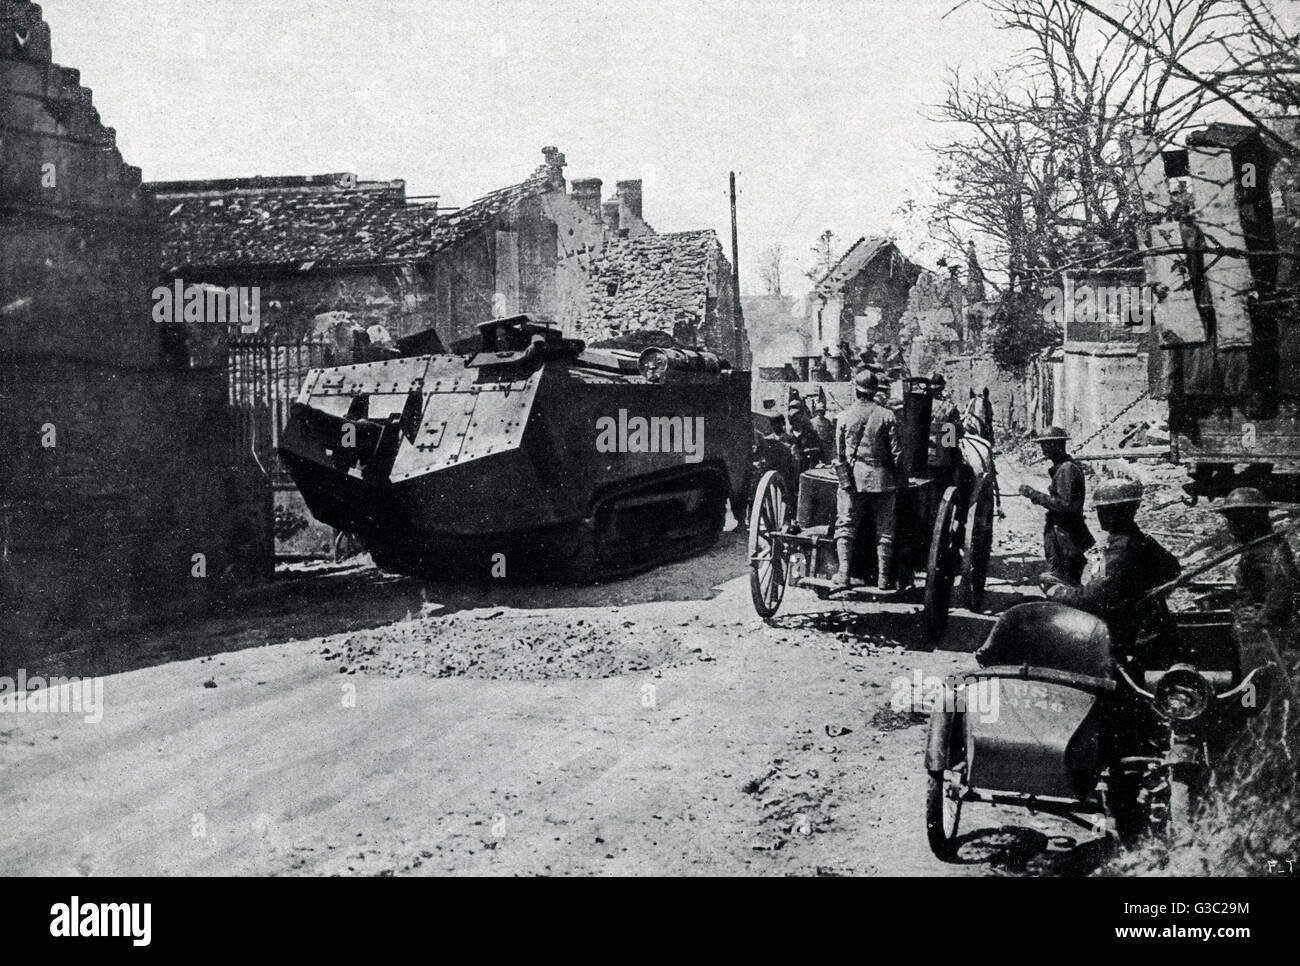 WW1 - Military tank and soldiers in Aisne, France, 1918 Stock Photo